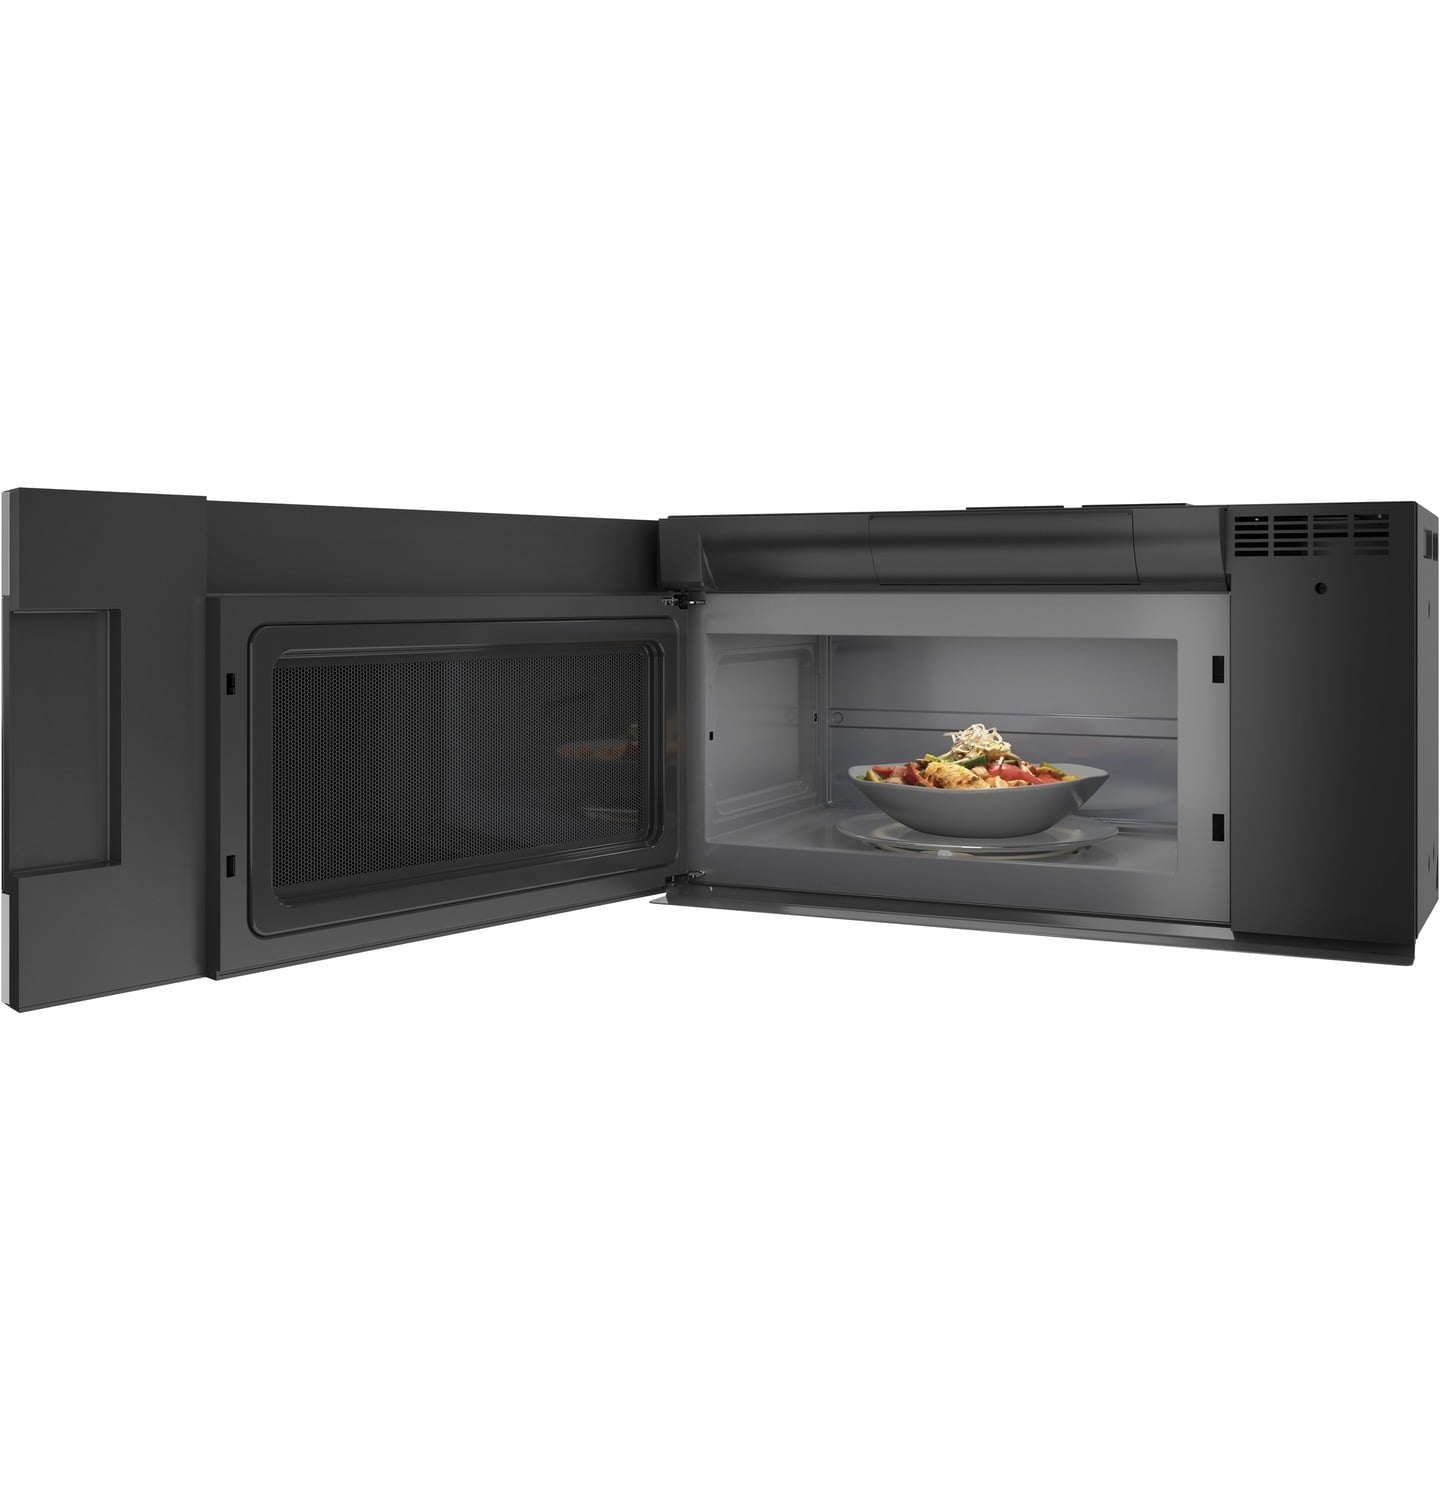 Haier QVM7167RNSS 30" 1.6 Cu. Ft. Smart Over-The-Range Microwave Oven